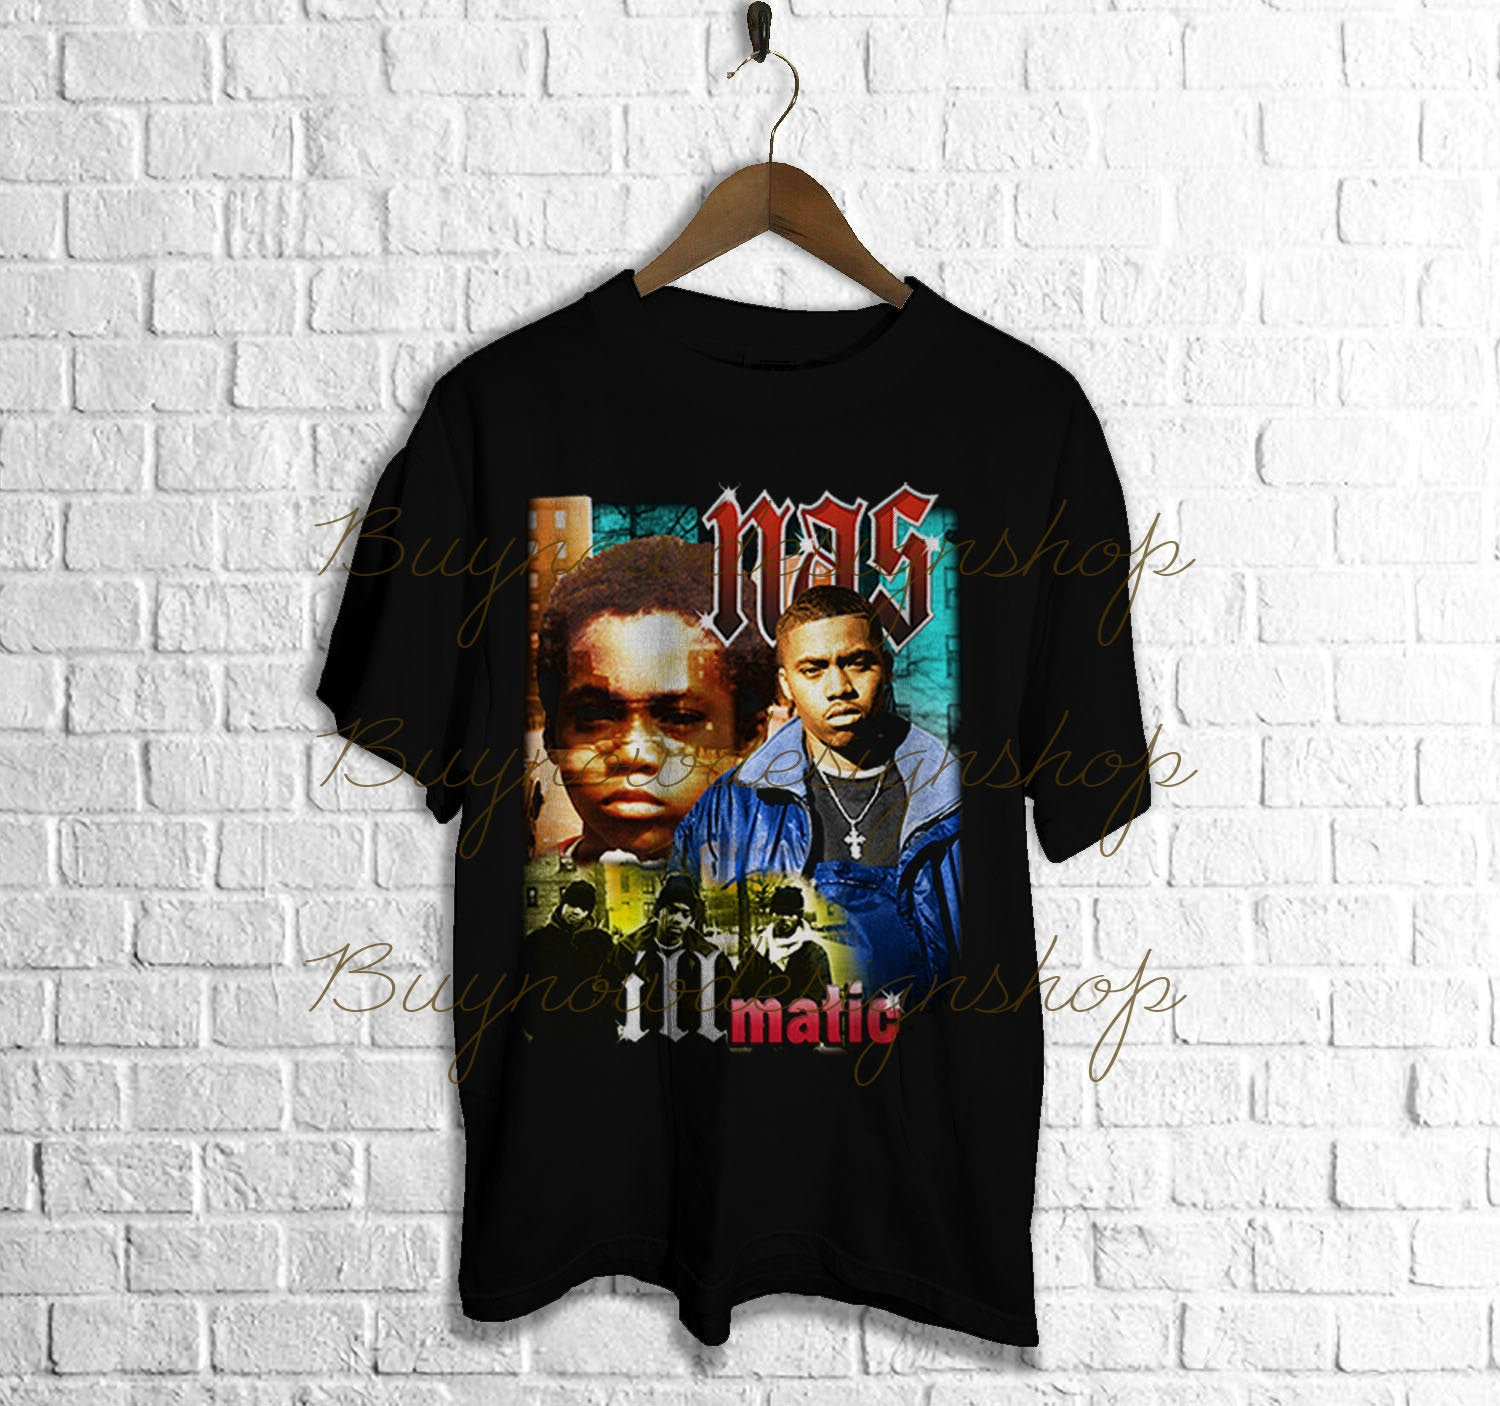 Illmatic Nas T shirt Perfect Gift For Friends Lil Nas X Sweatshirt Illmatic Nas Hoodie Illmatic Nas Sweatshirt Lil Nas X Shirt